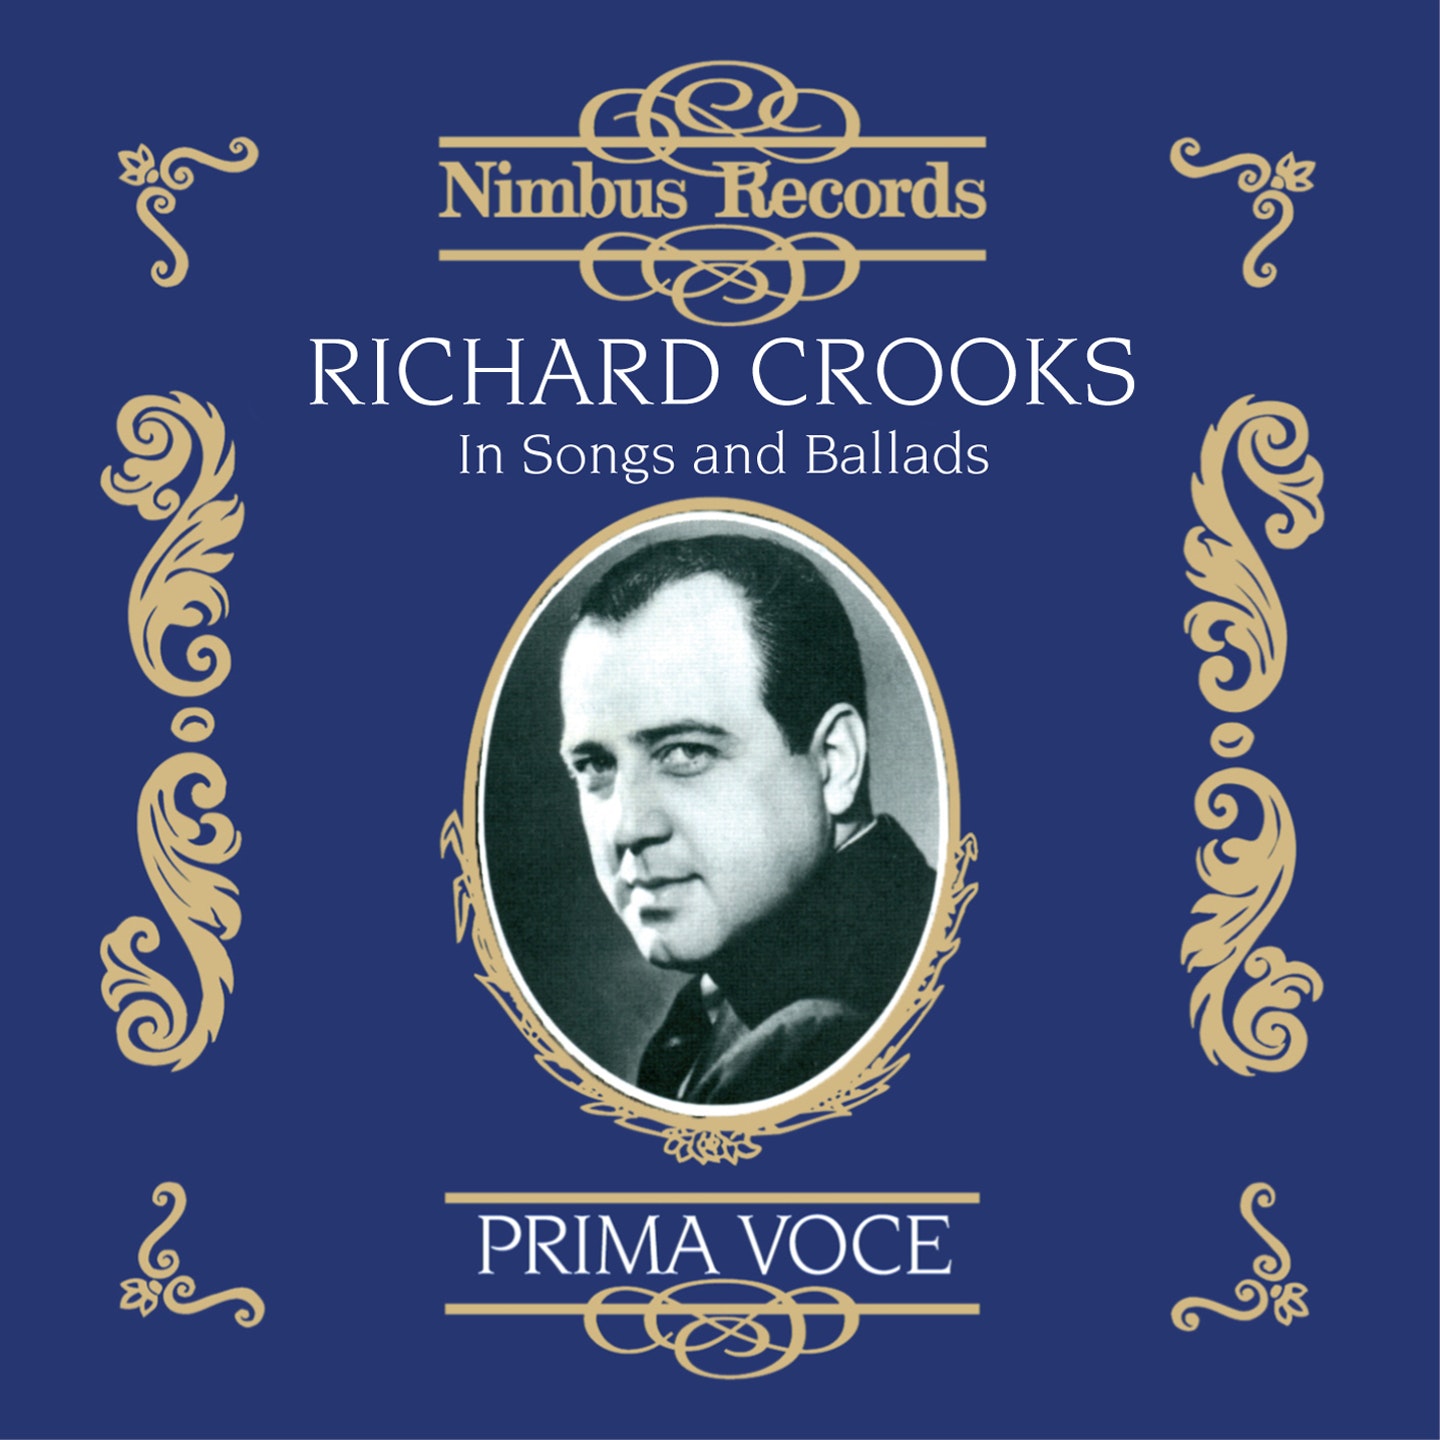 Richard Crooks in Song 1926-1941